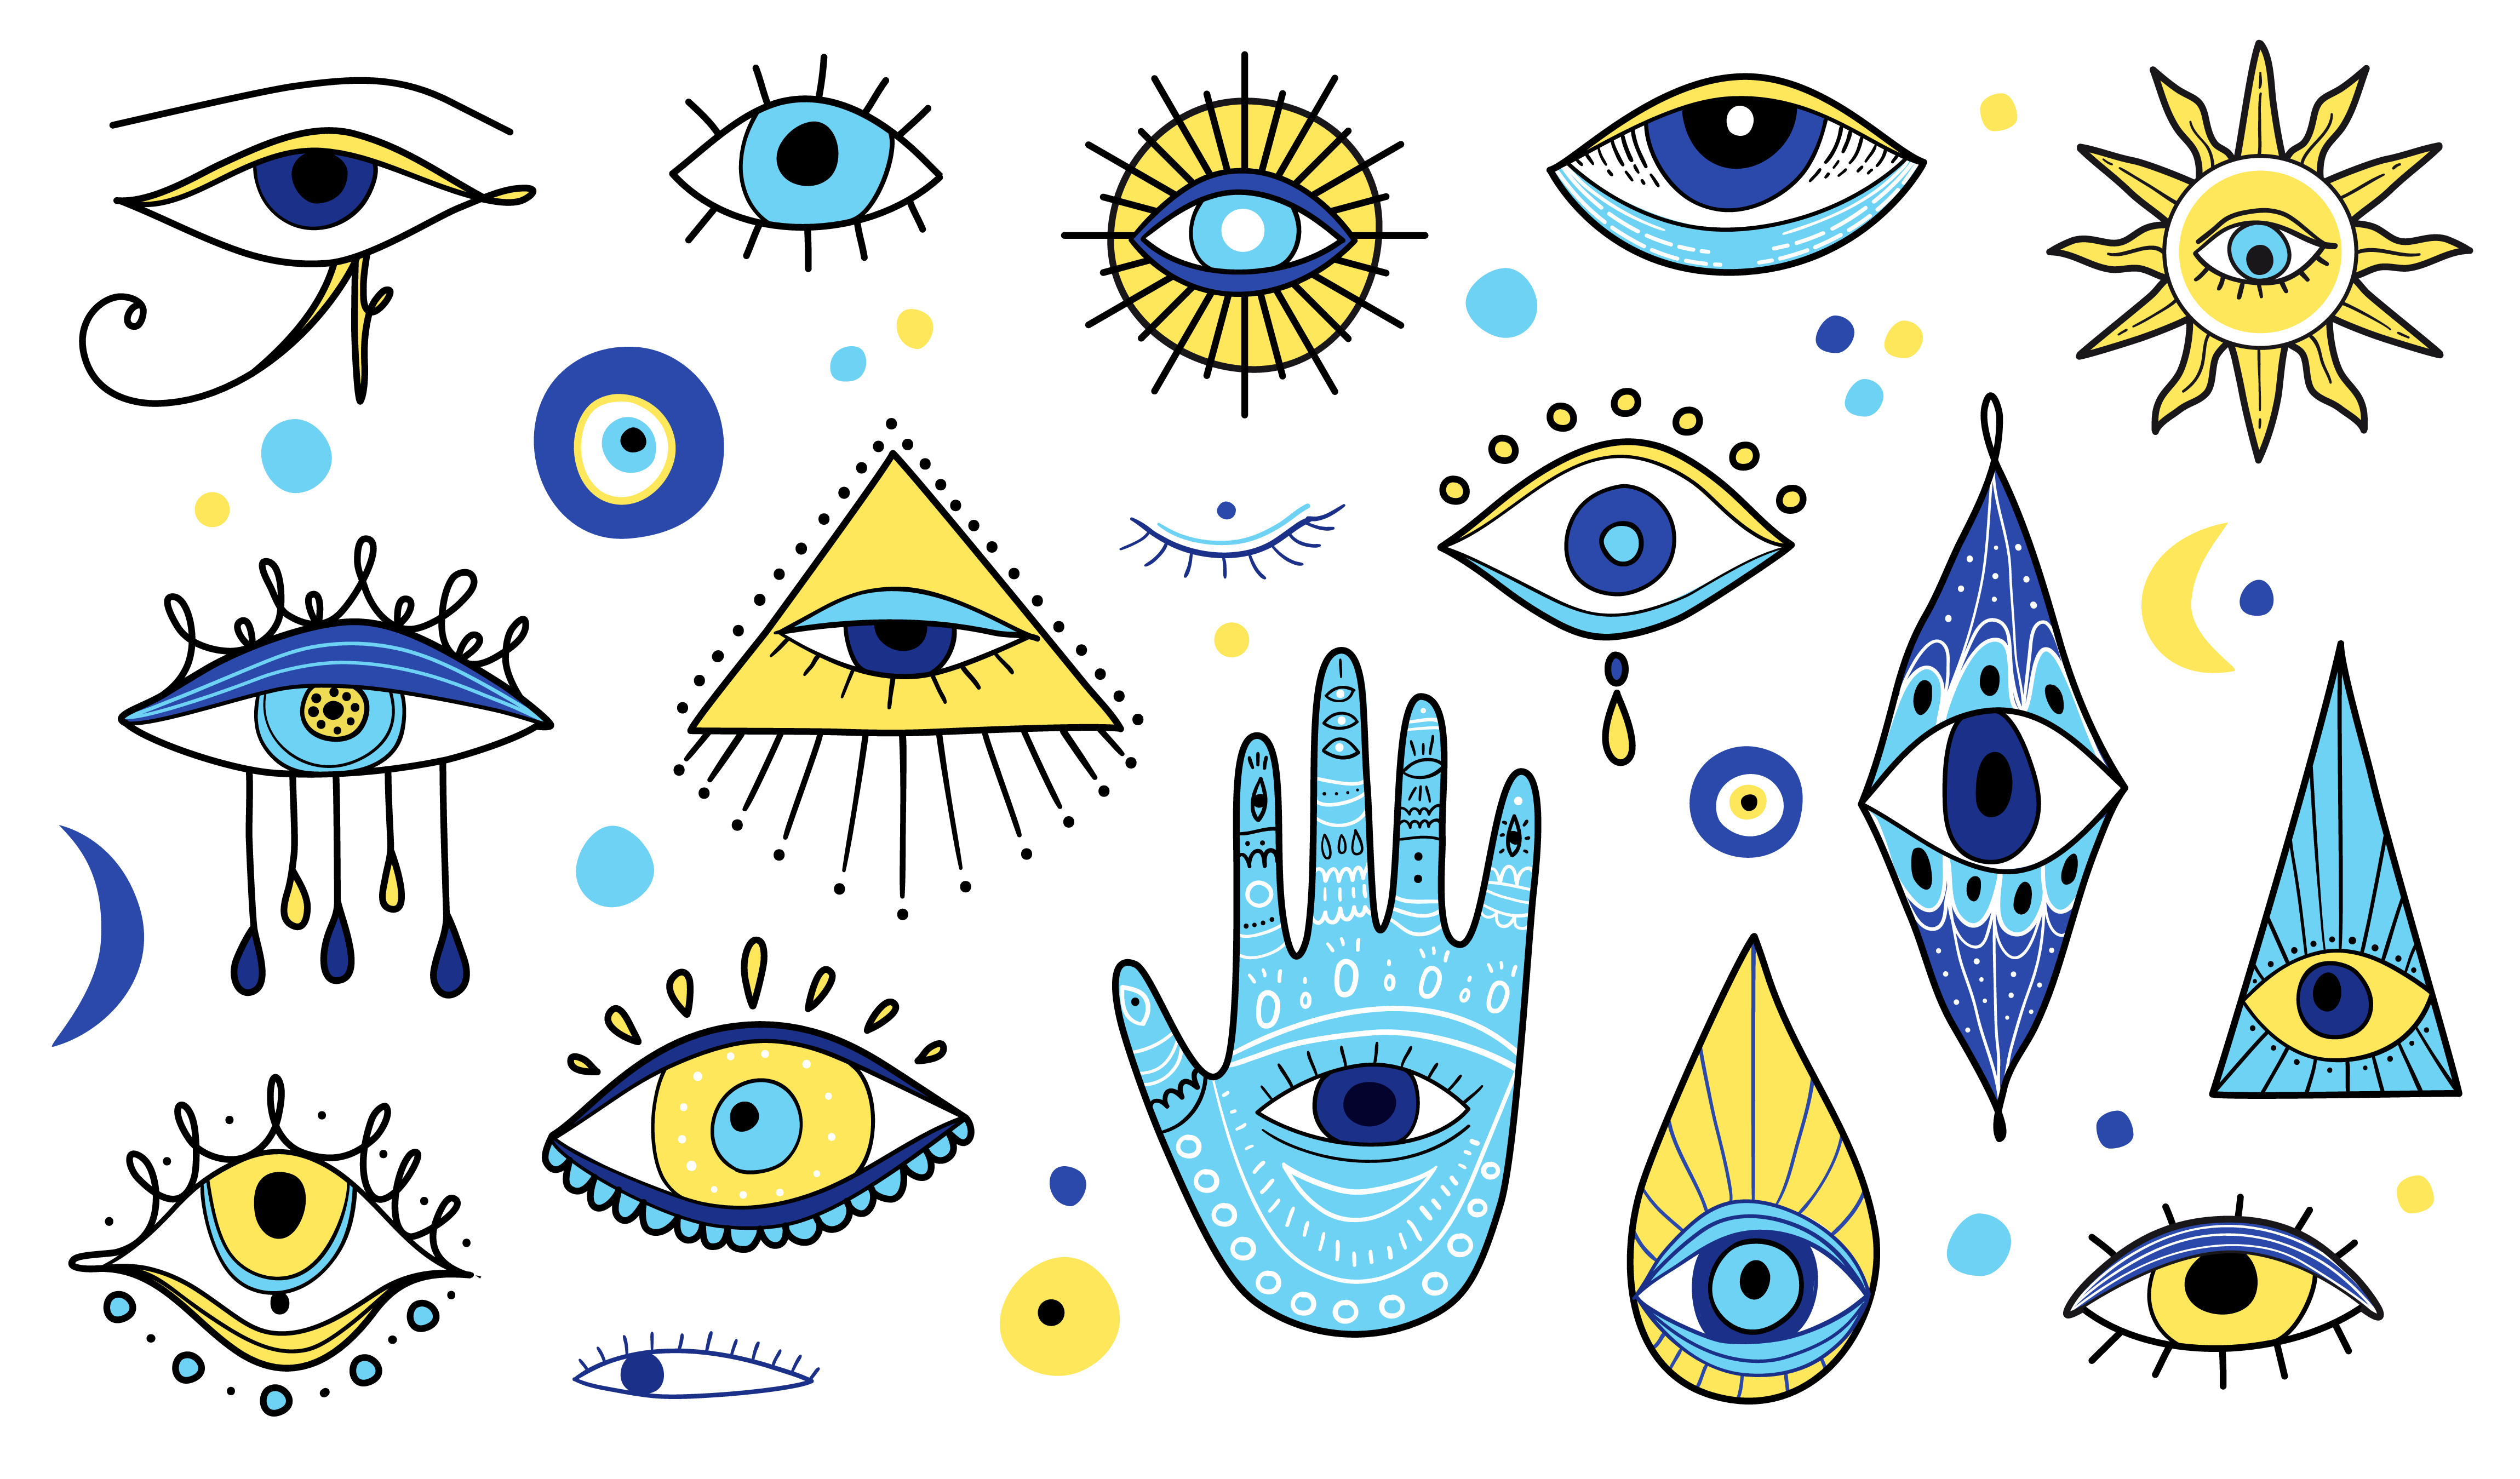 The evil eye and social anxiety